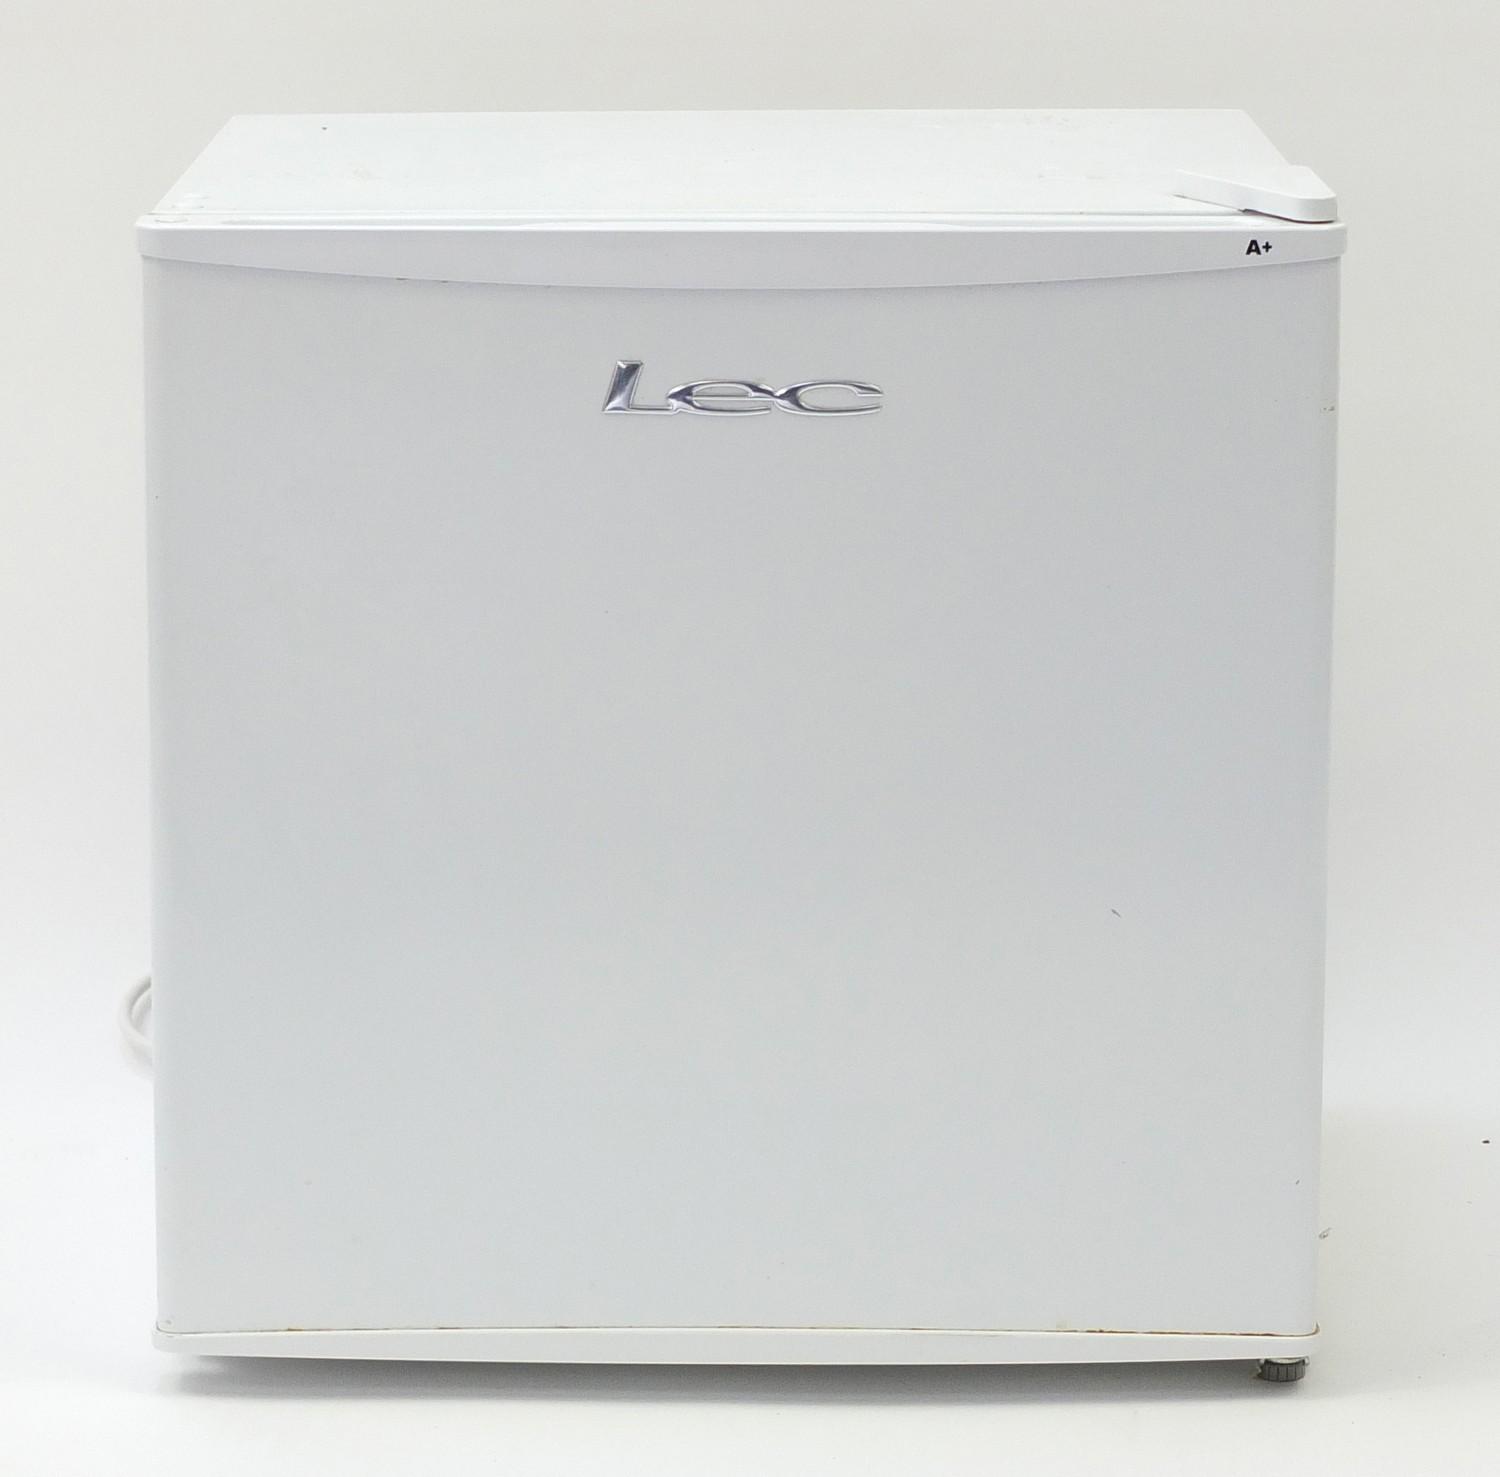 LEC counter top fridge, 48cm H x 48cm W x 45cm D : For Further Condition Reports Please Visit Our